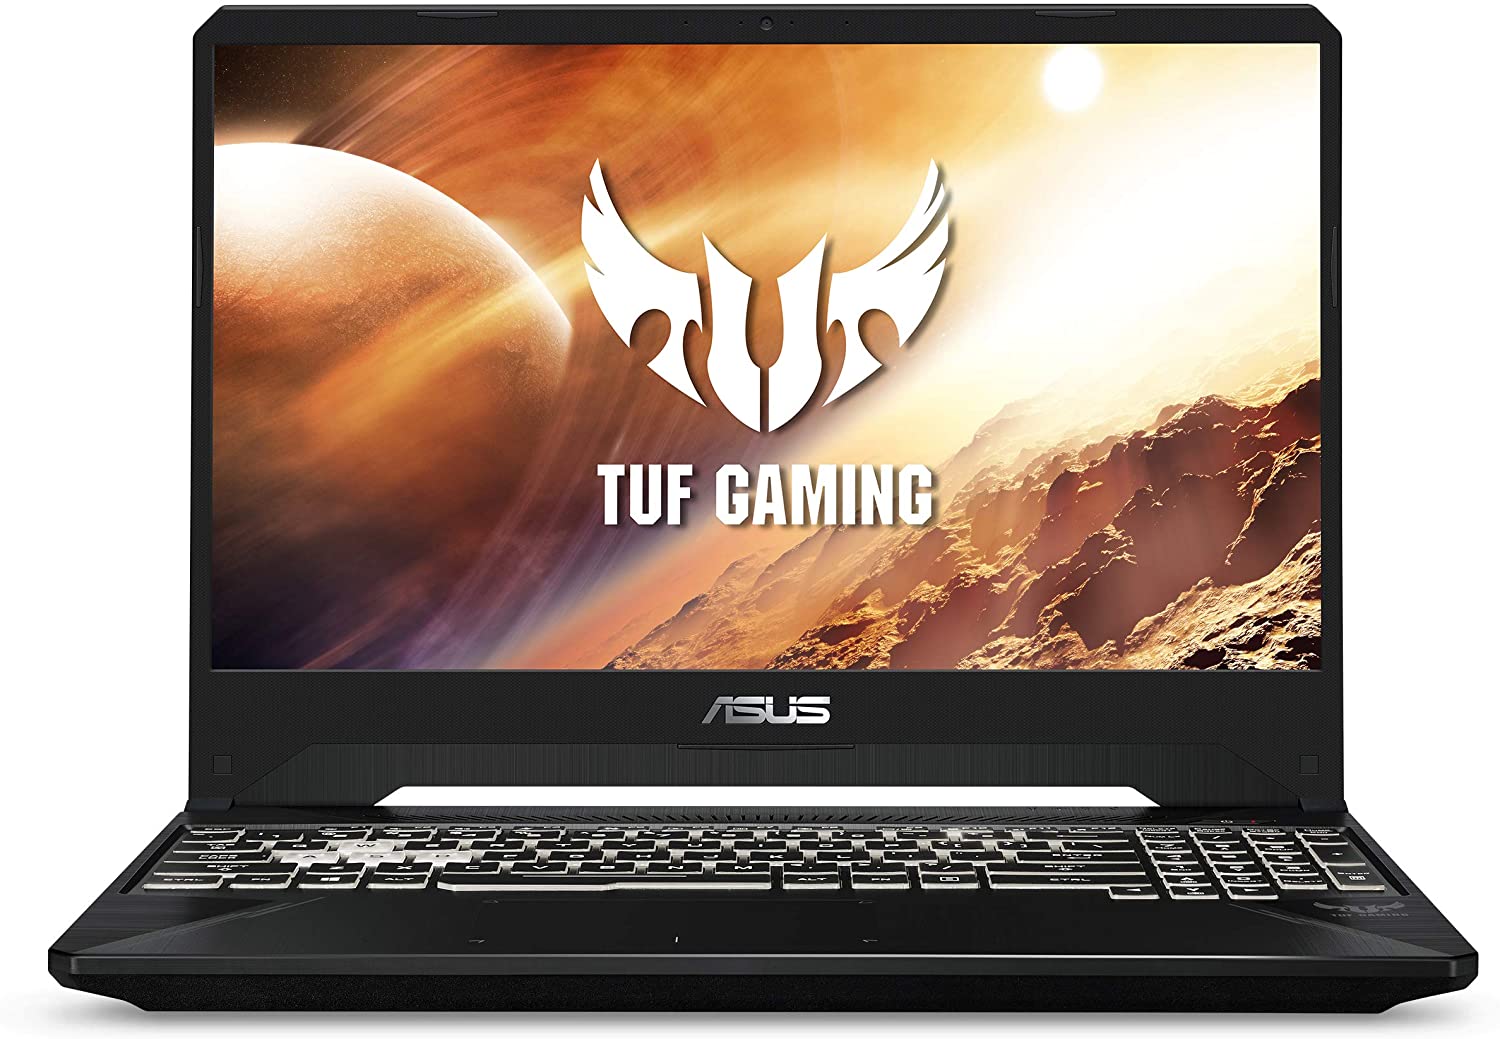 ASUS TUF FX505DT after effects and cinema 4d Laptop